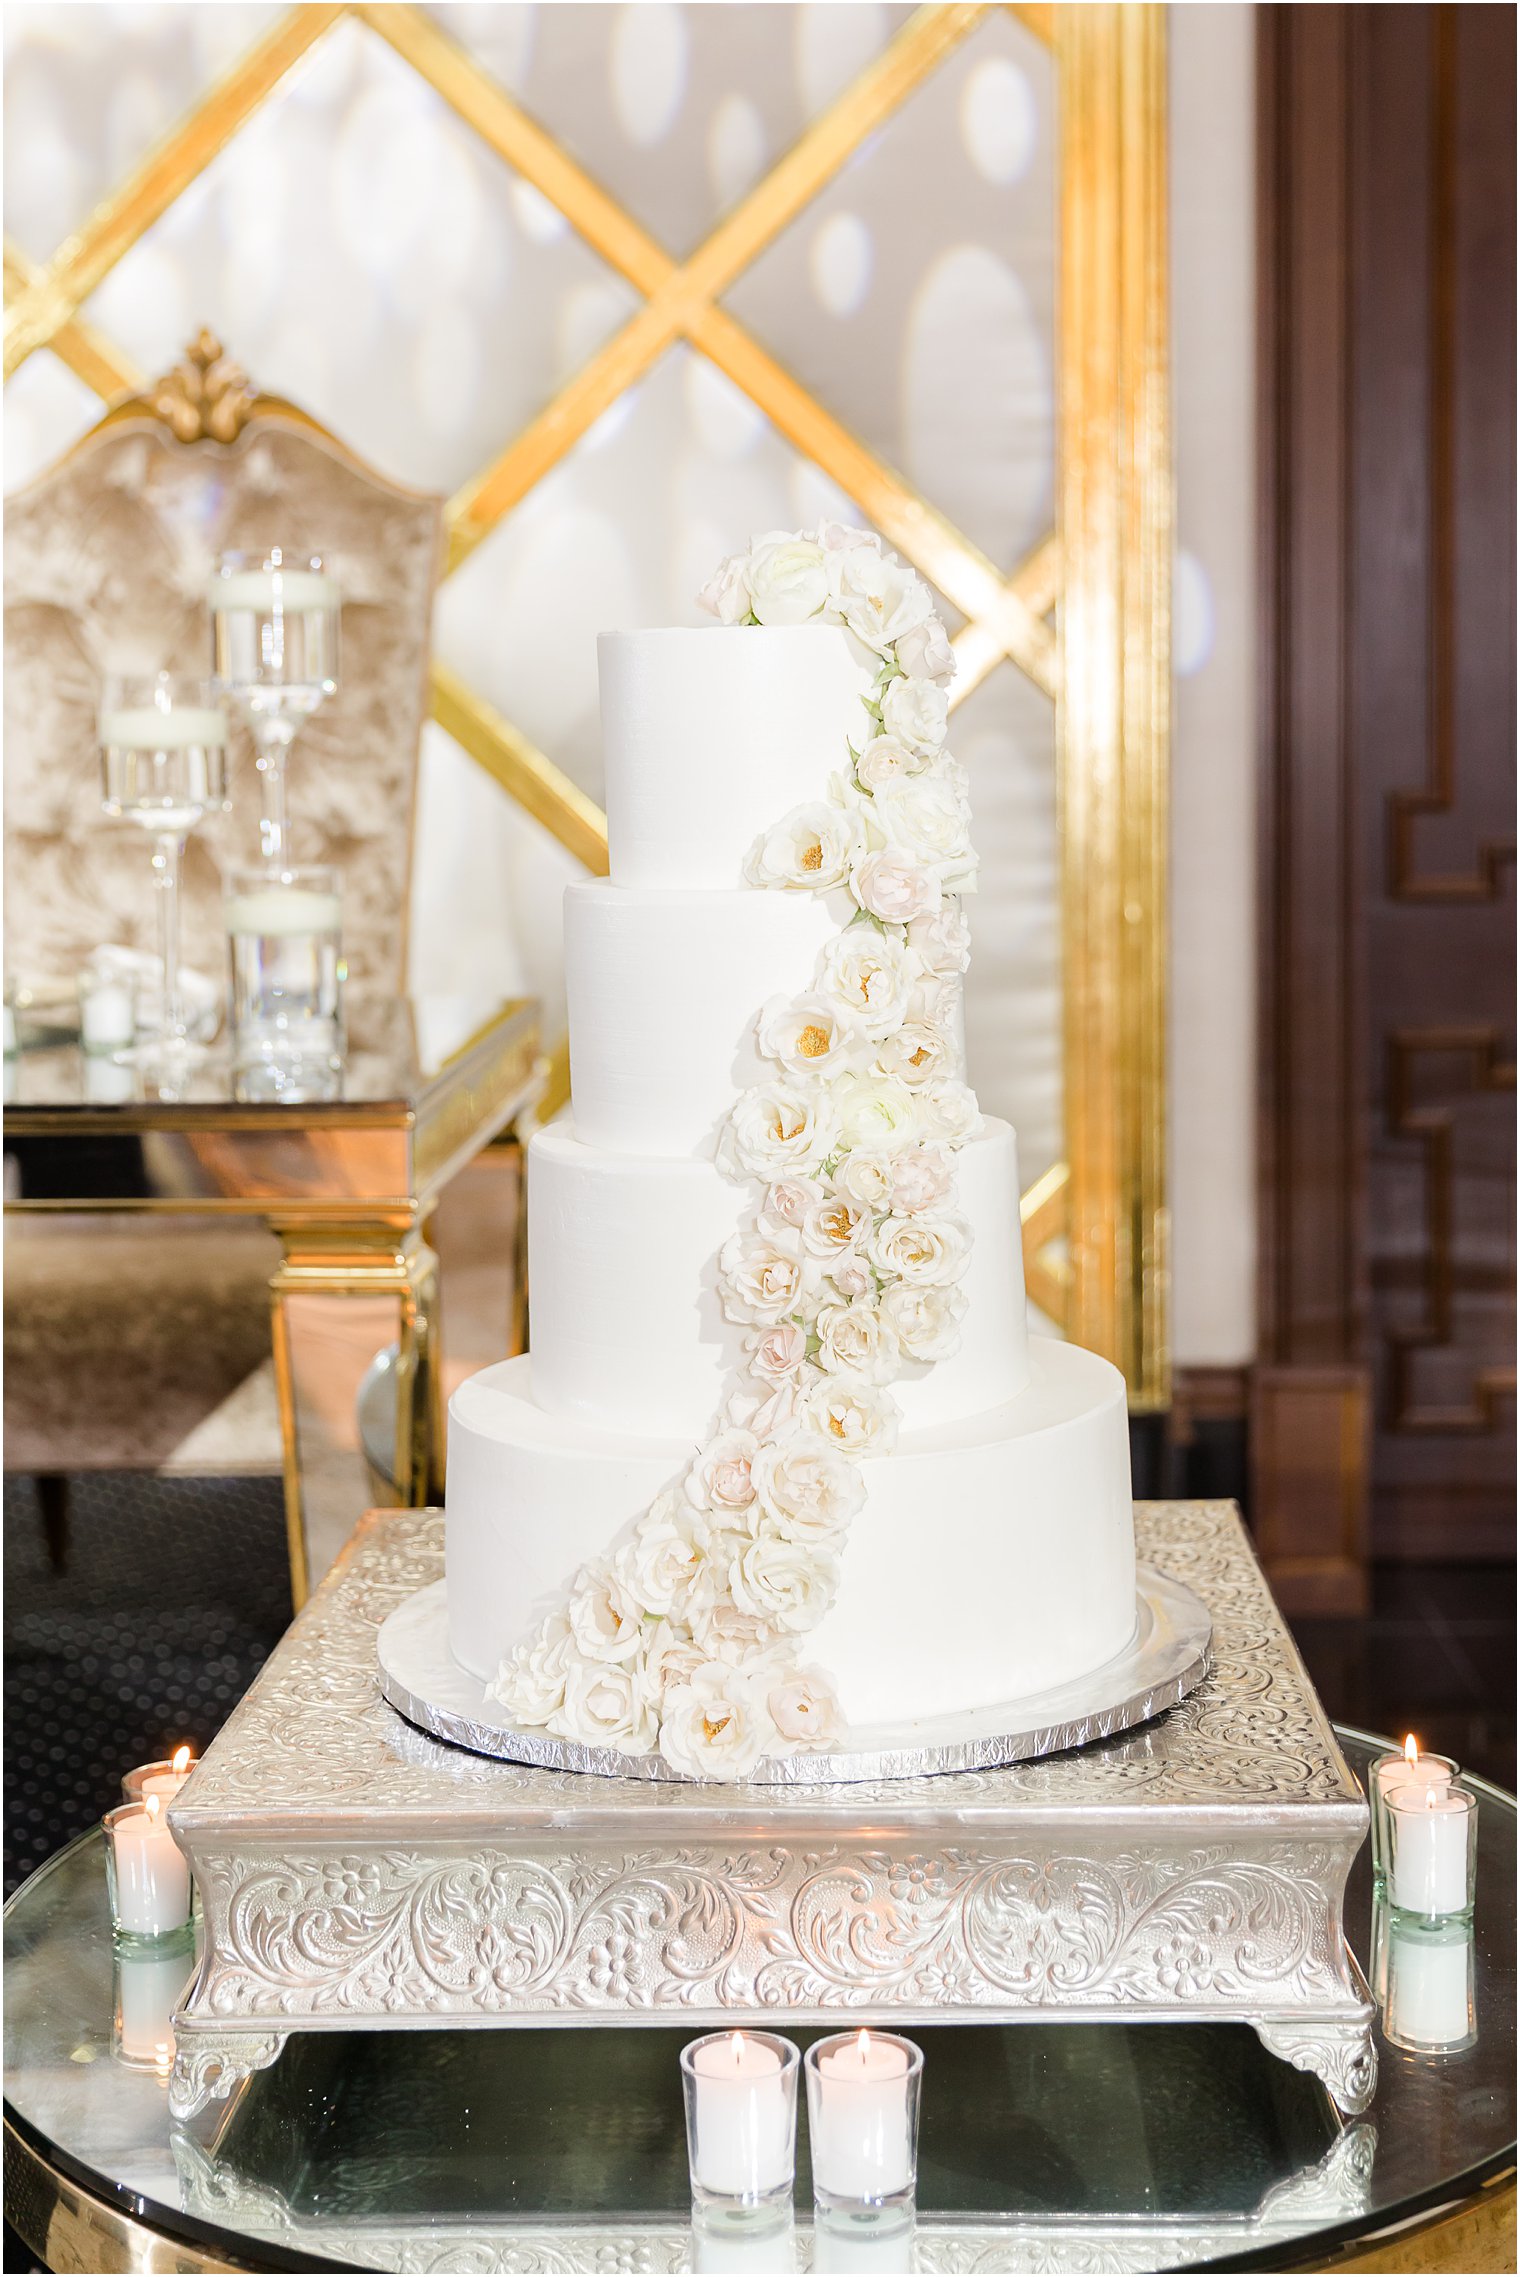 tiered wedding cake with gold details at Shadowbrook at Shrewsbury